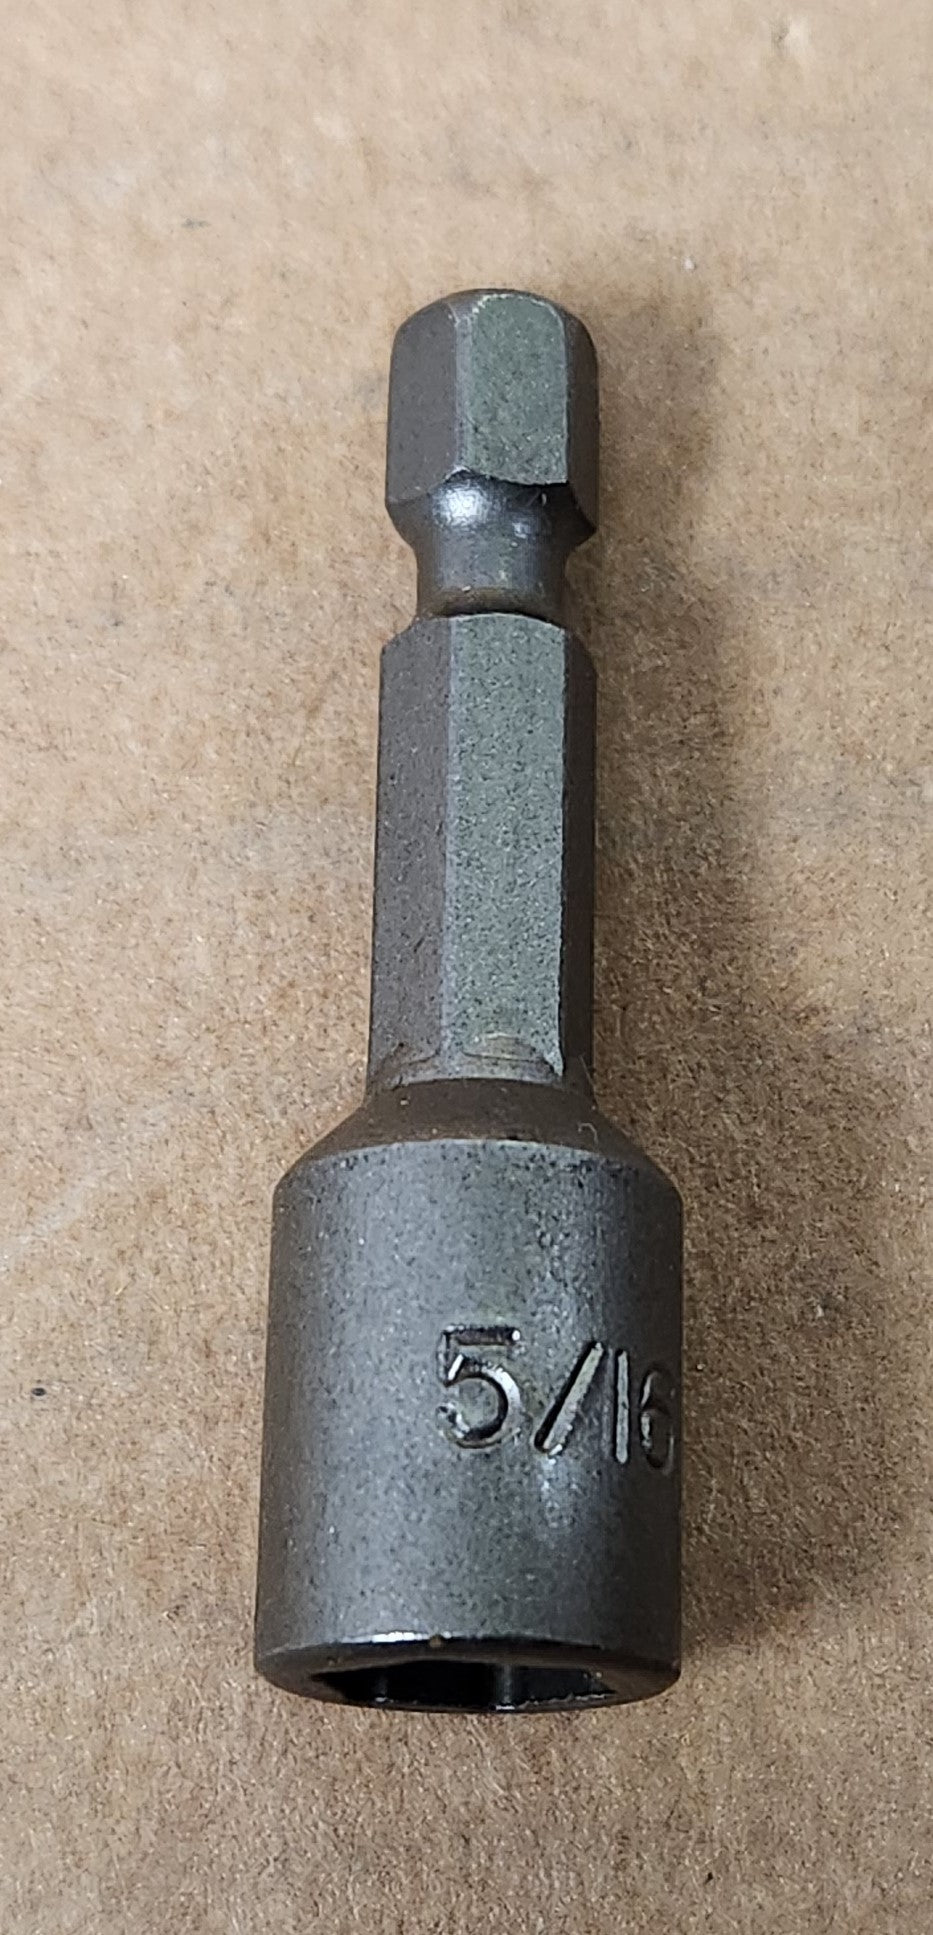 5/16" MAGNETIC HEX DRIVER